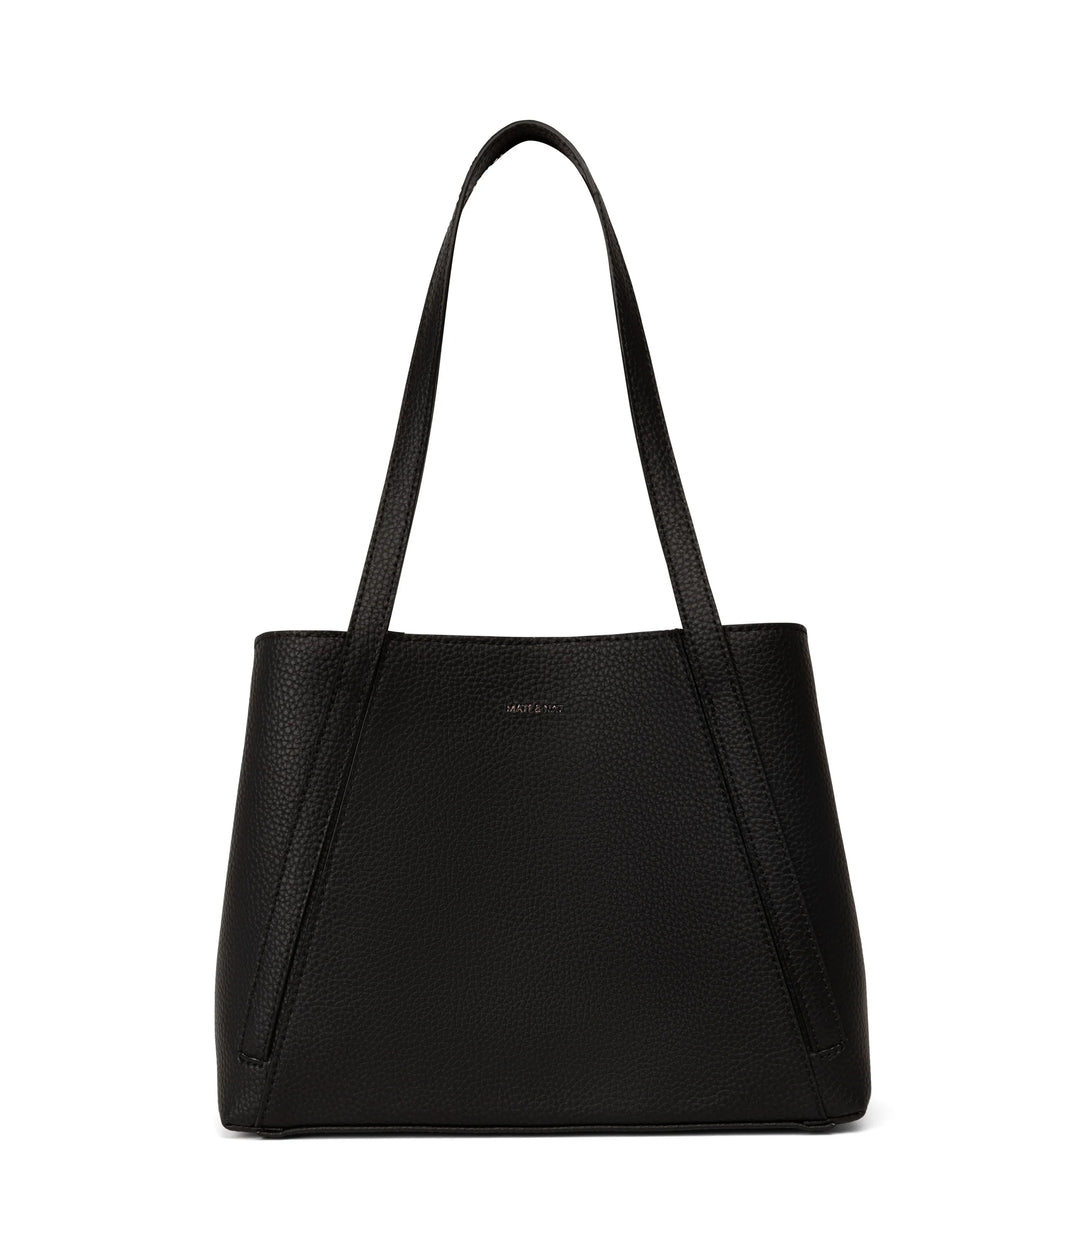 Zoey Purity Tote Bag - Black